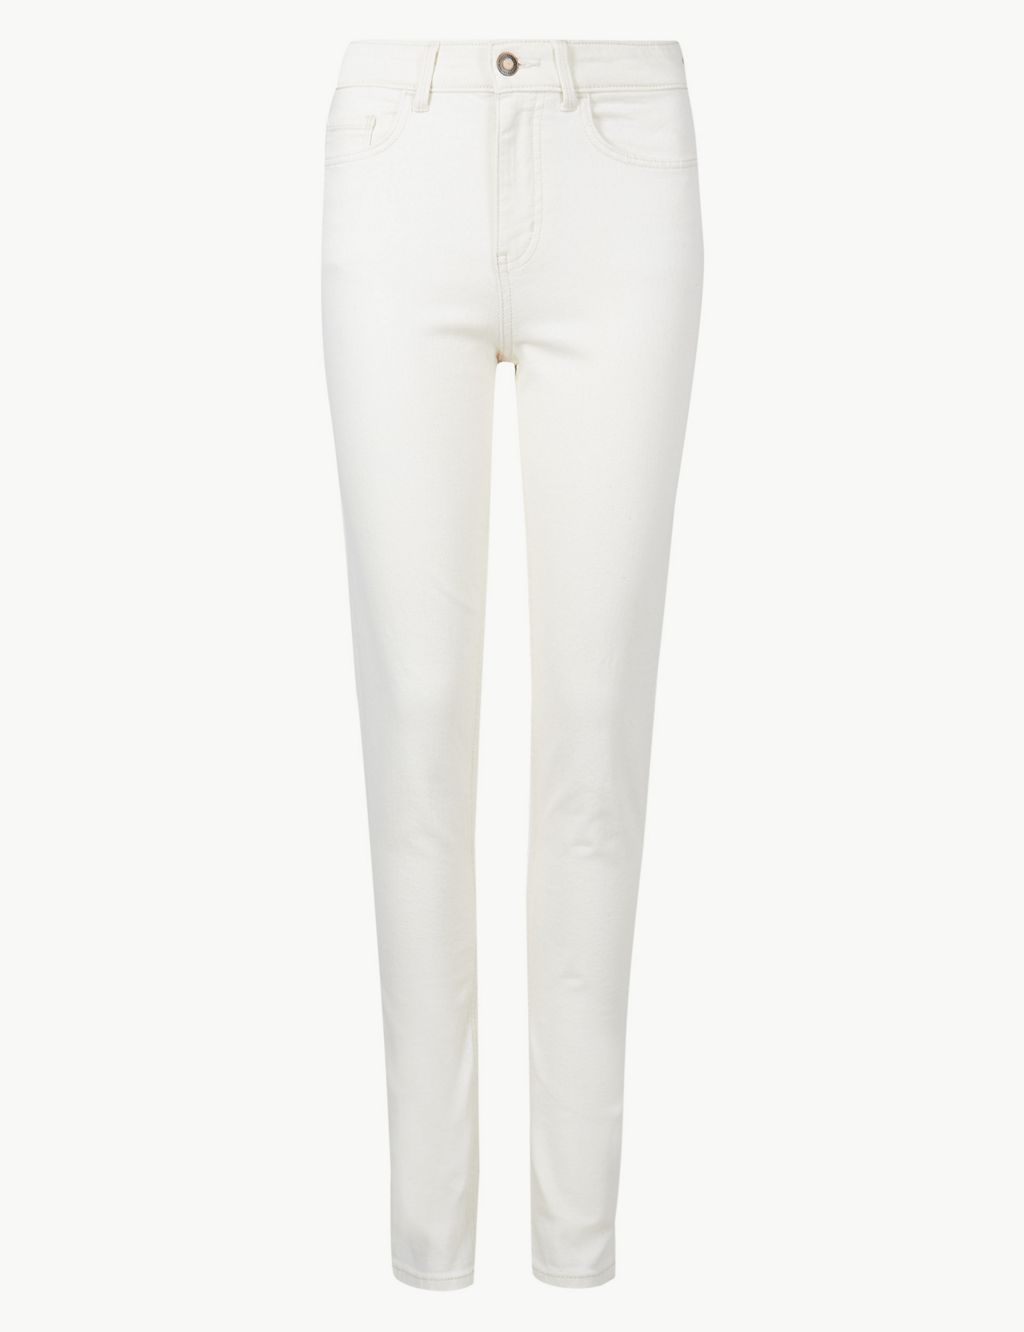 Lily Slim Fit Jeans | M&S Collection | M&S